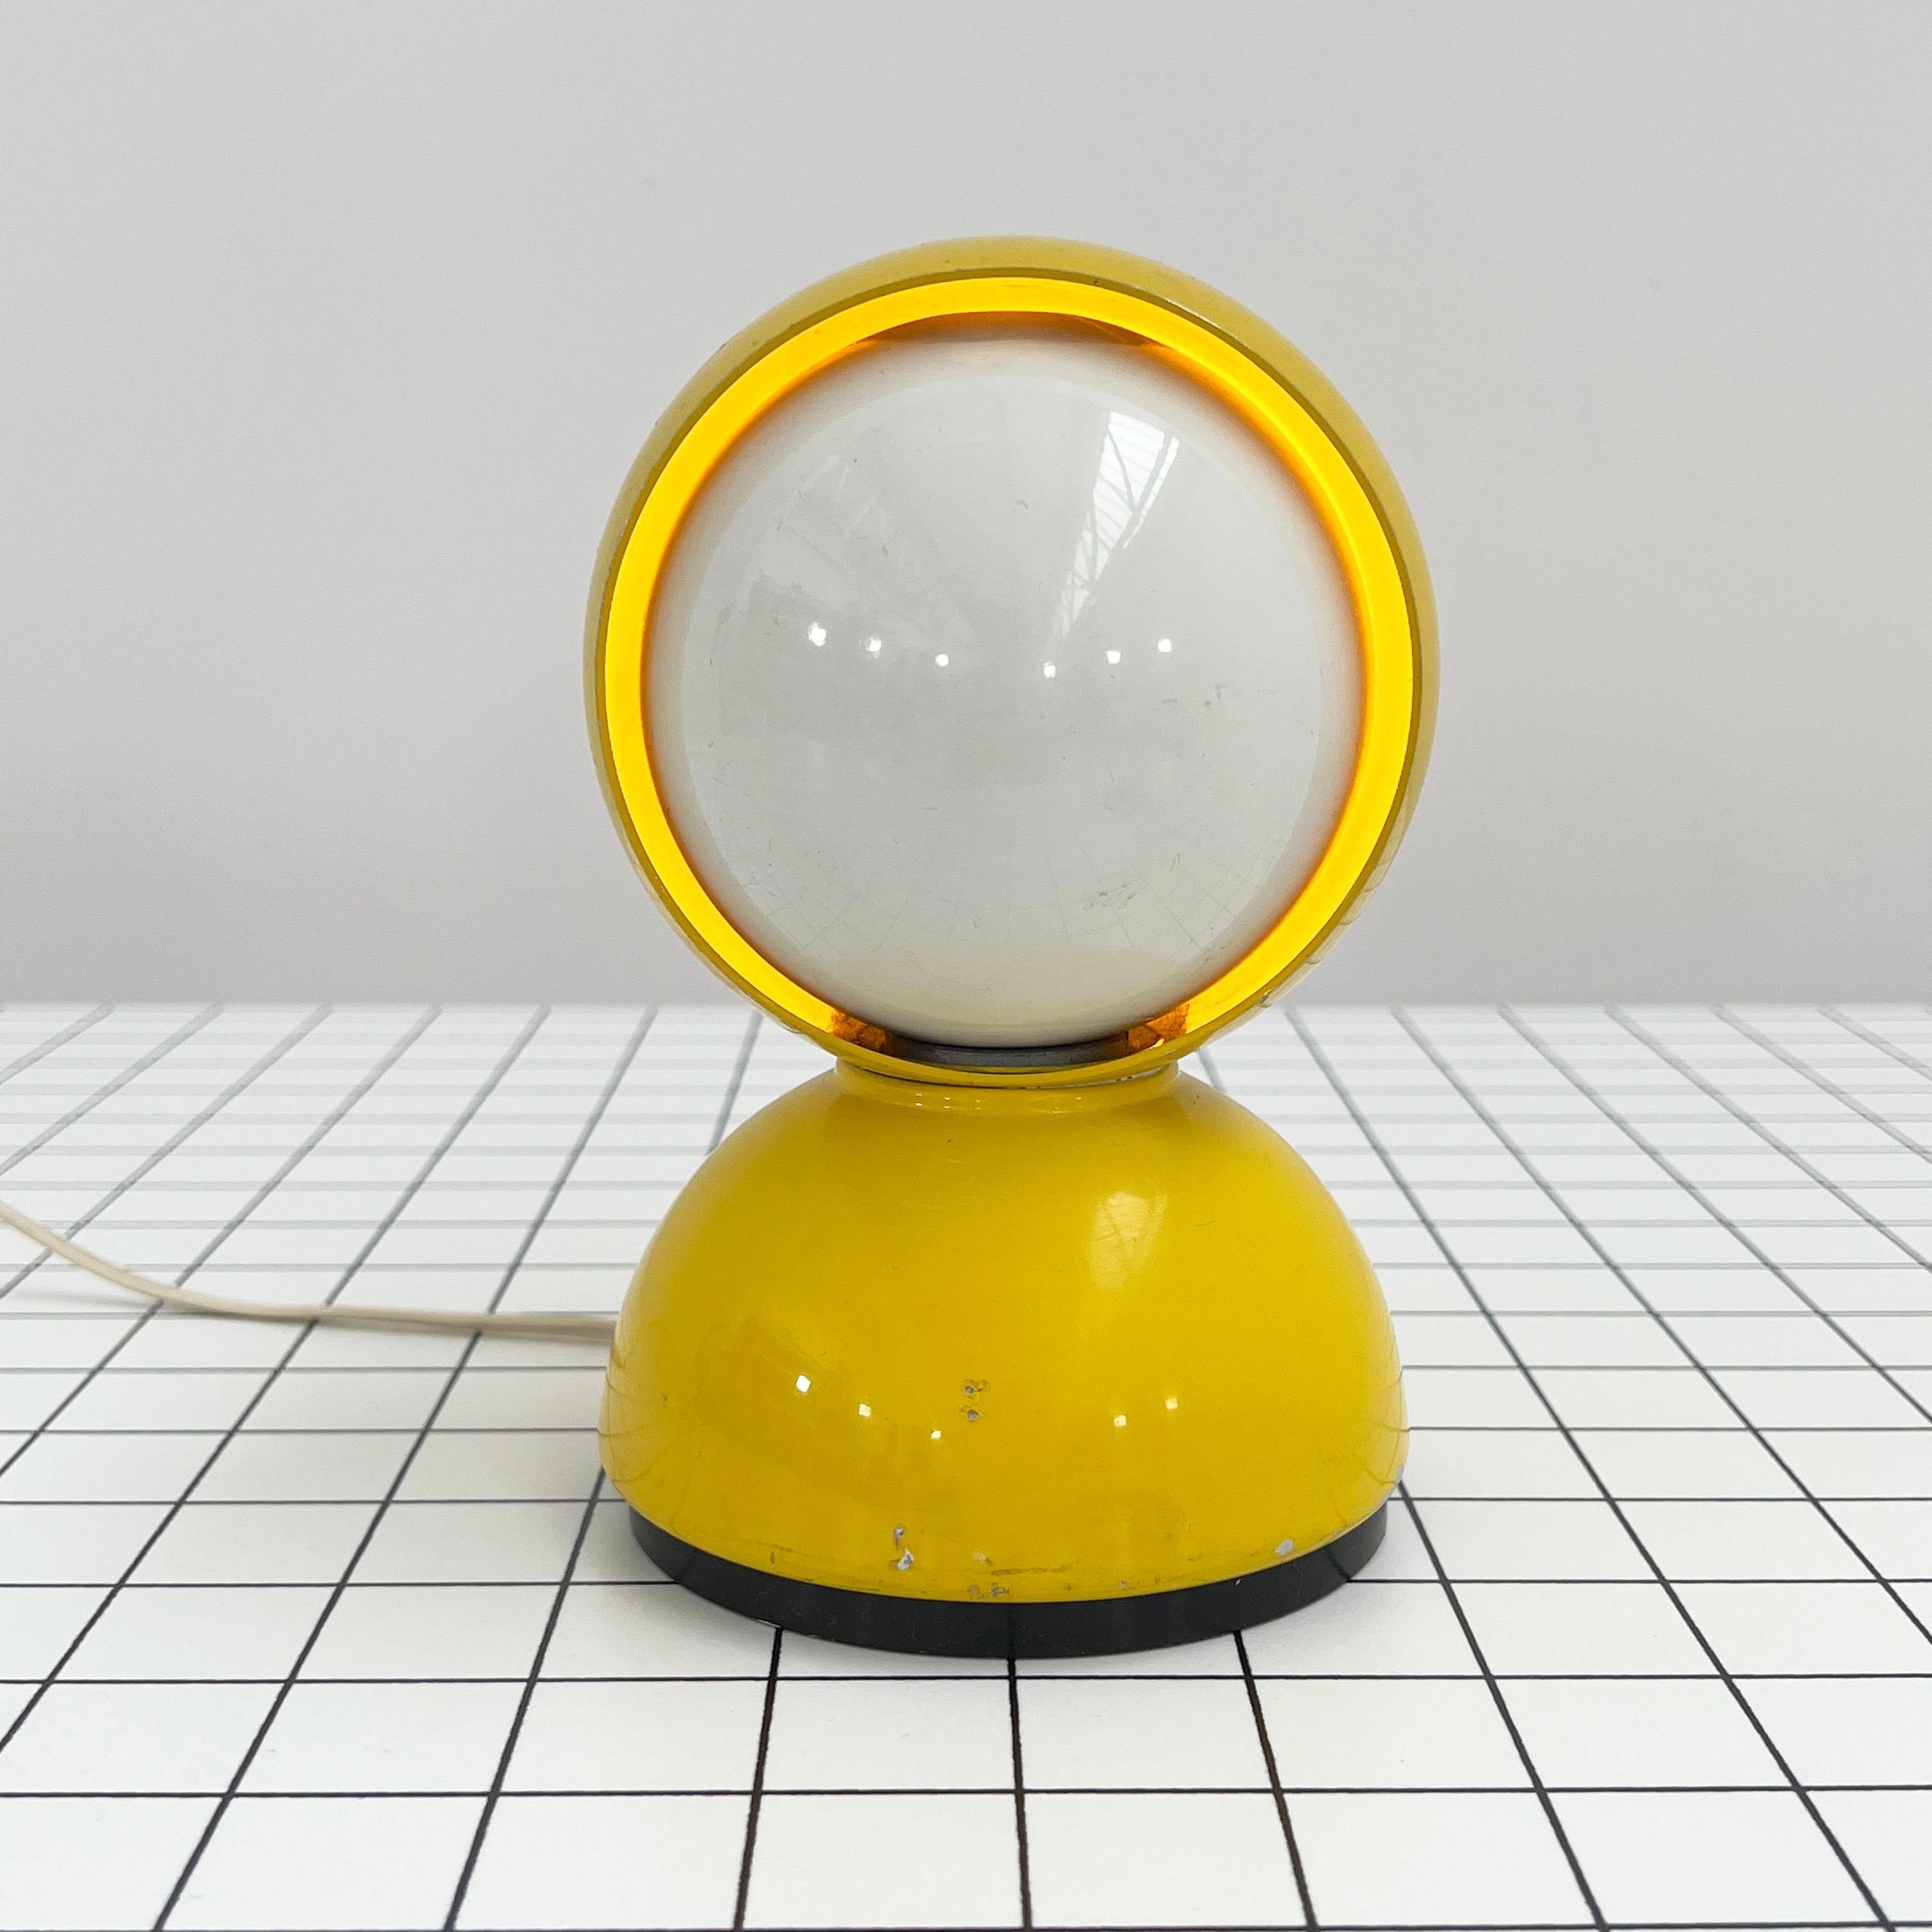 Yellow Eclisse Table Lamp by Vico Magistretti for Artemide, 1960s
Designer - Vico Magistretti
Producer - Artemide
Model - Eclisse Table Lamp
Design Period - Sixties
Measurements - Width 12 cm x Depth 12 cm x Height 18,5 cm
Materials -